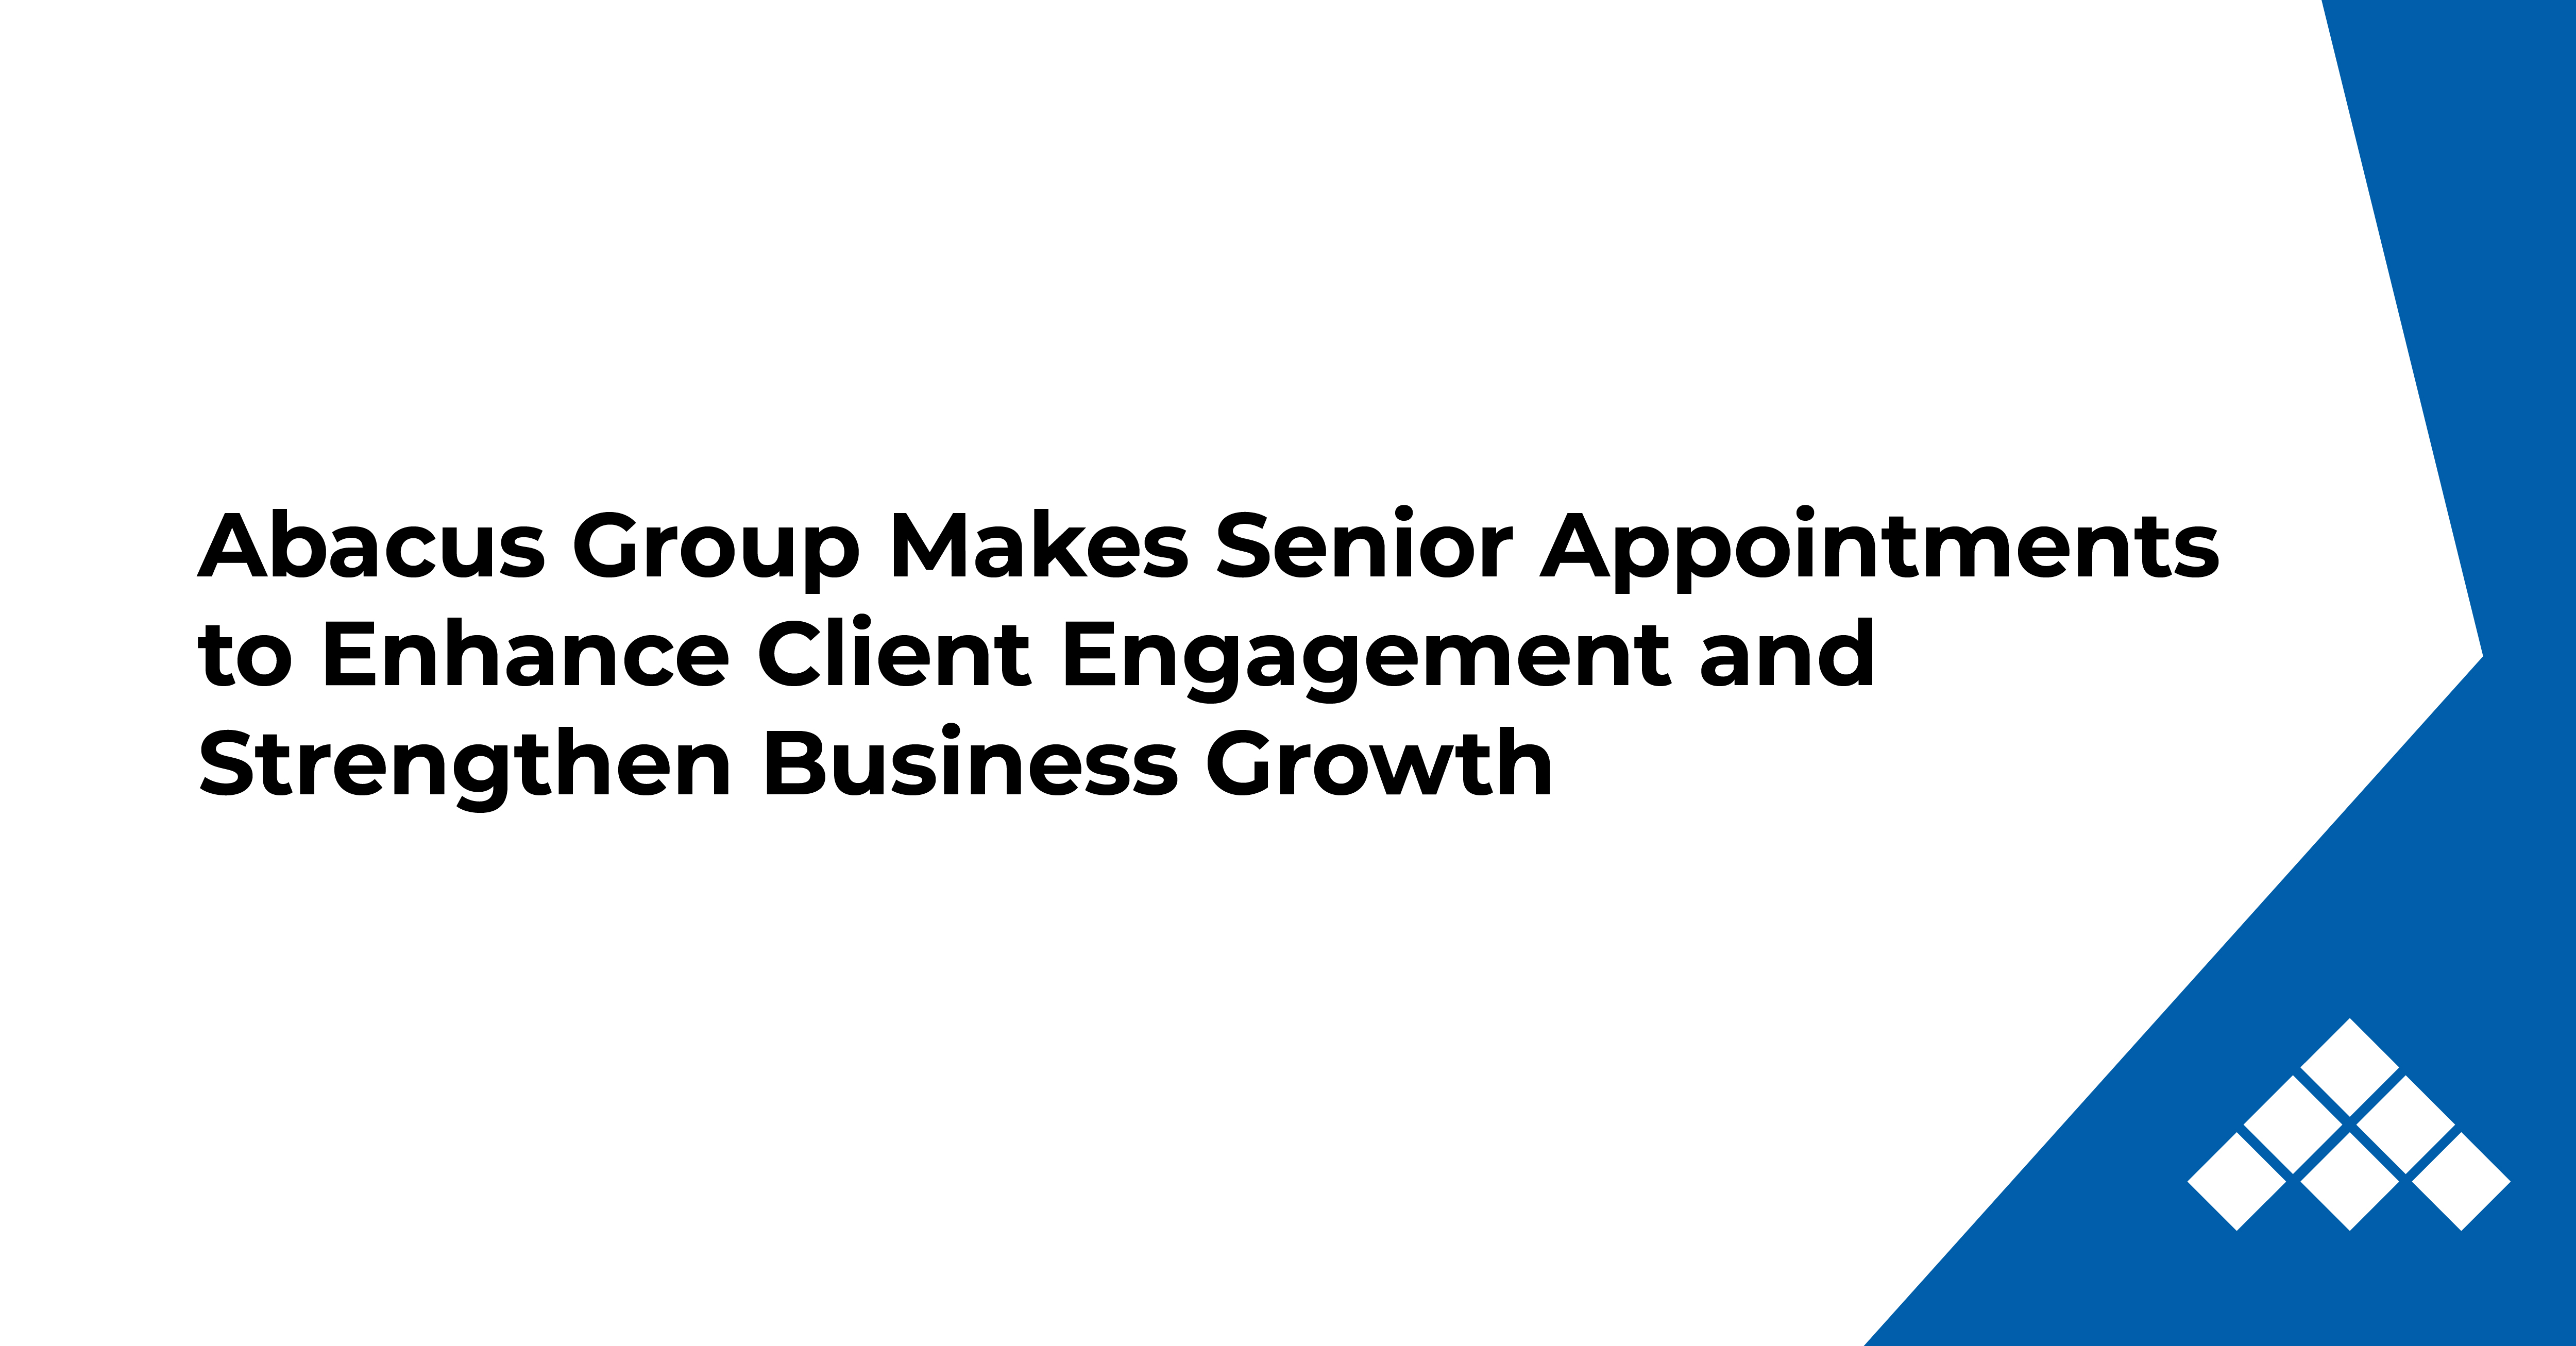 Abacus Group Makes Senior Appointments to Enhance Client Engagement and Strengthen Business Growth